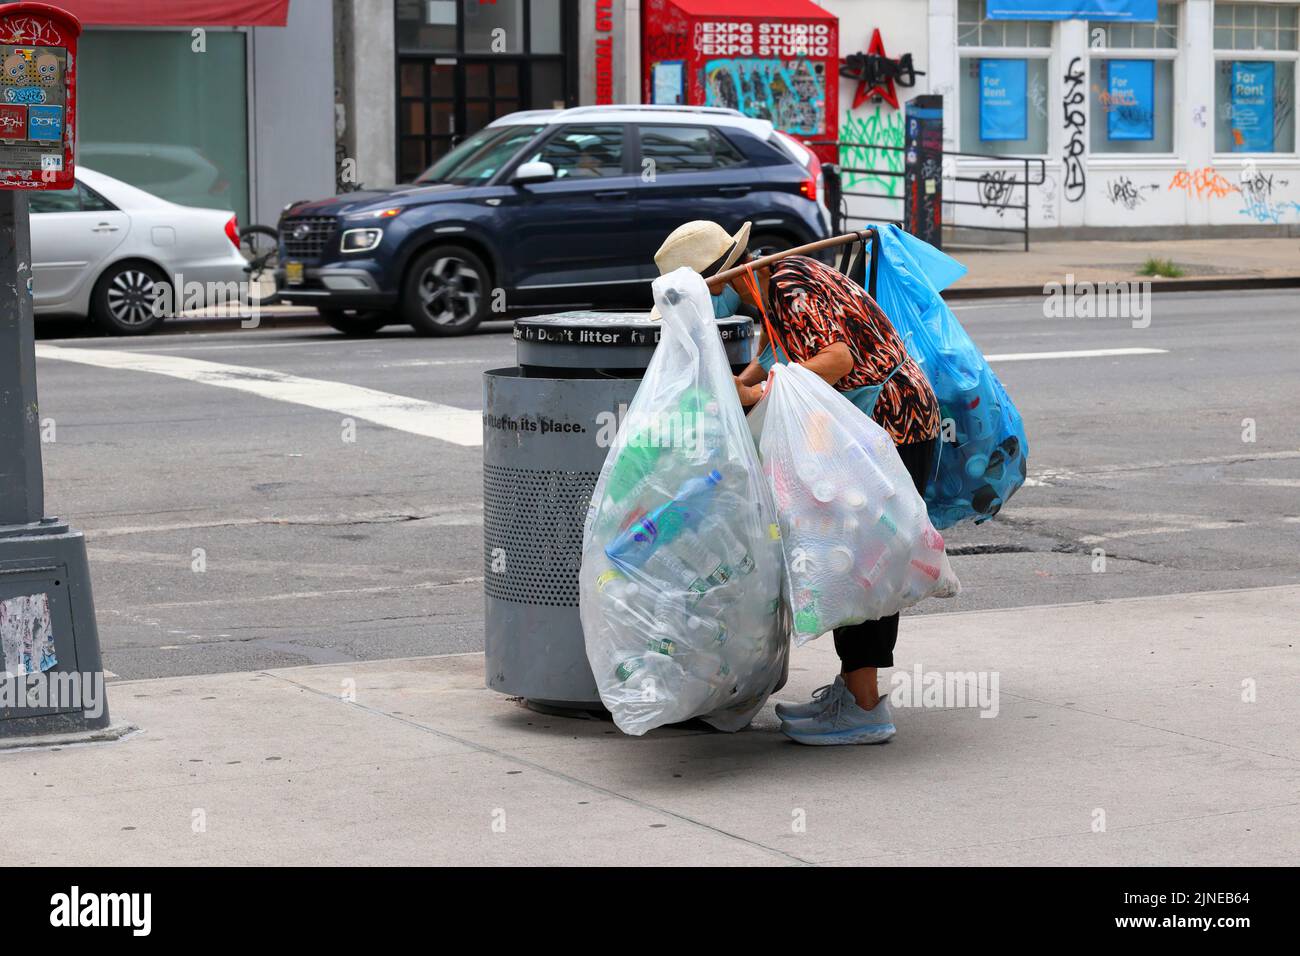 An elderly Asian person reaches into a New York City trash bin for recyclables. Many people, especially elderly Chinese, are dependent on the ... Stock Photo